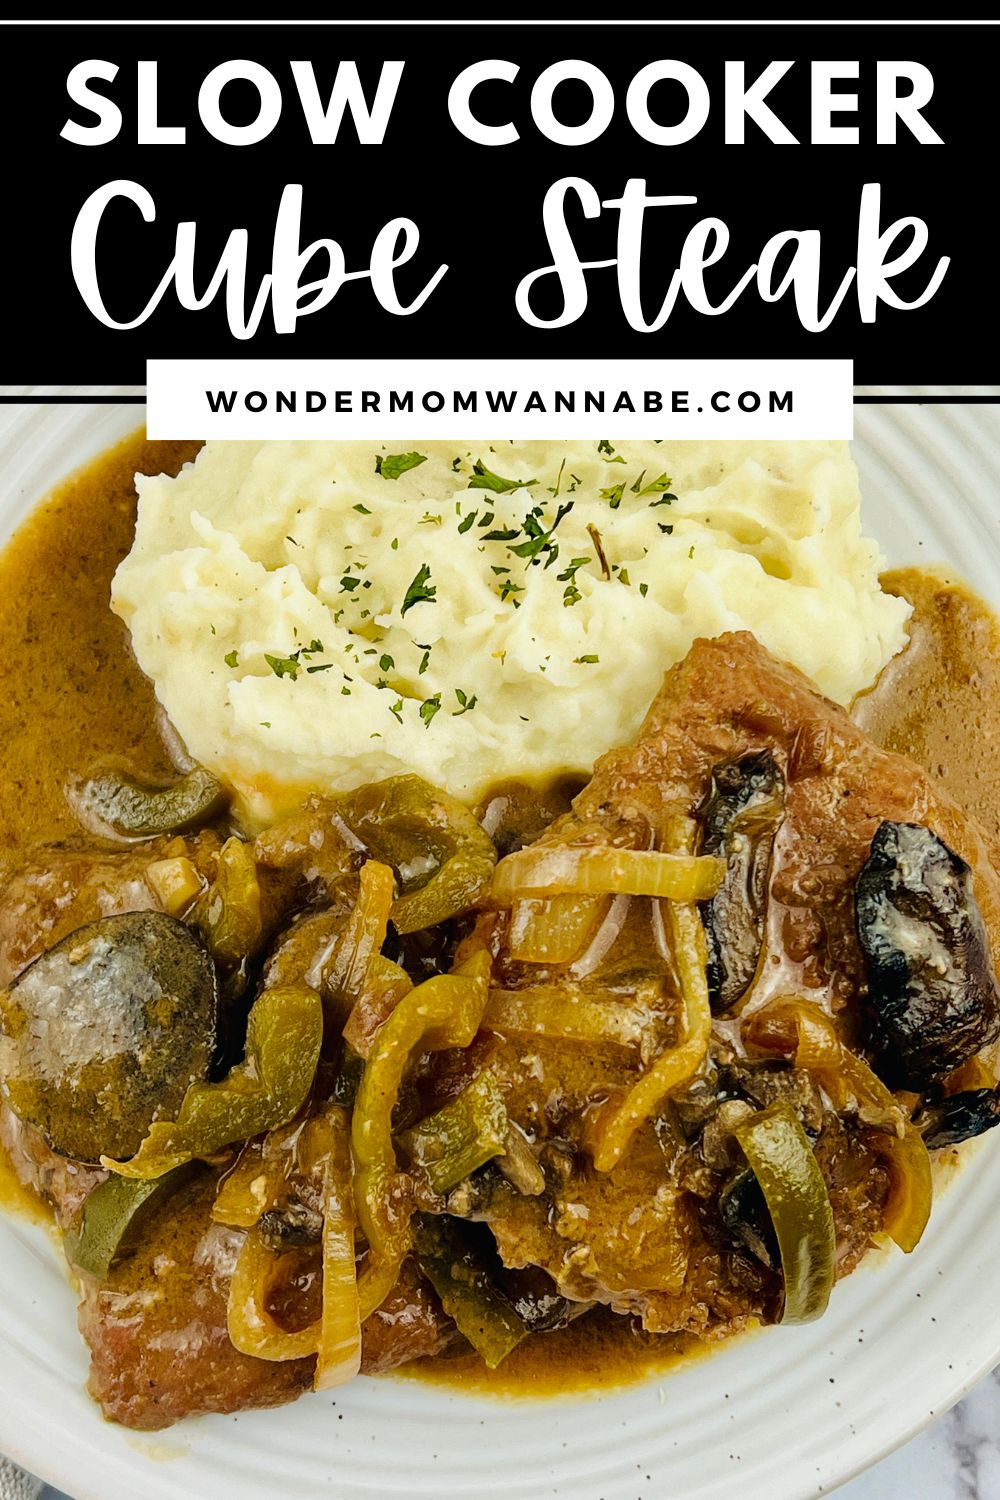 Slow cooker cube steak with mushrooms and mashed potatoes.